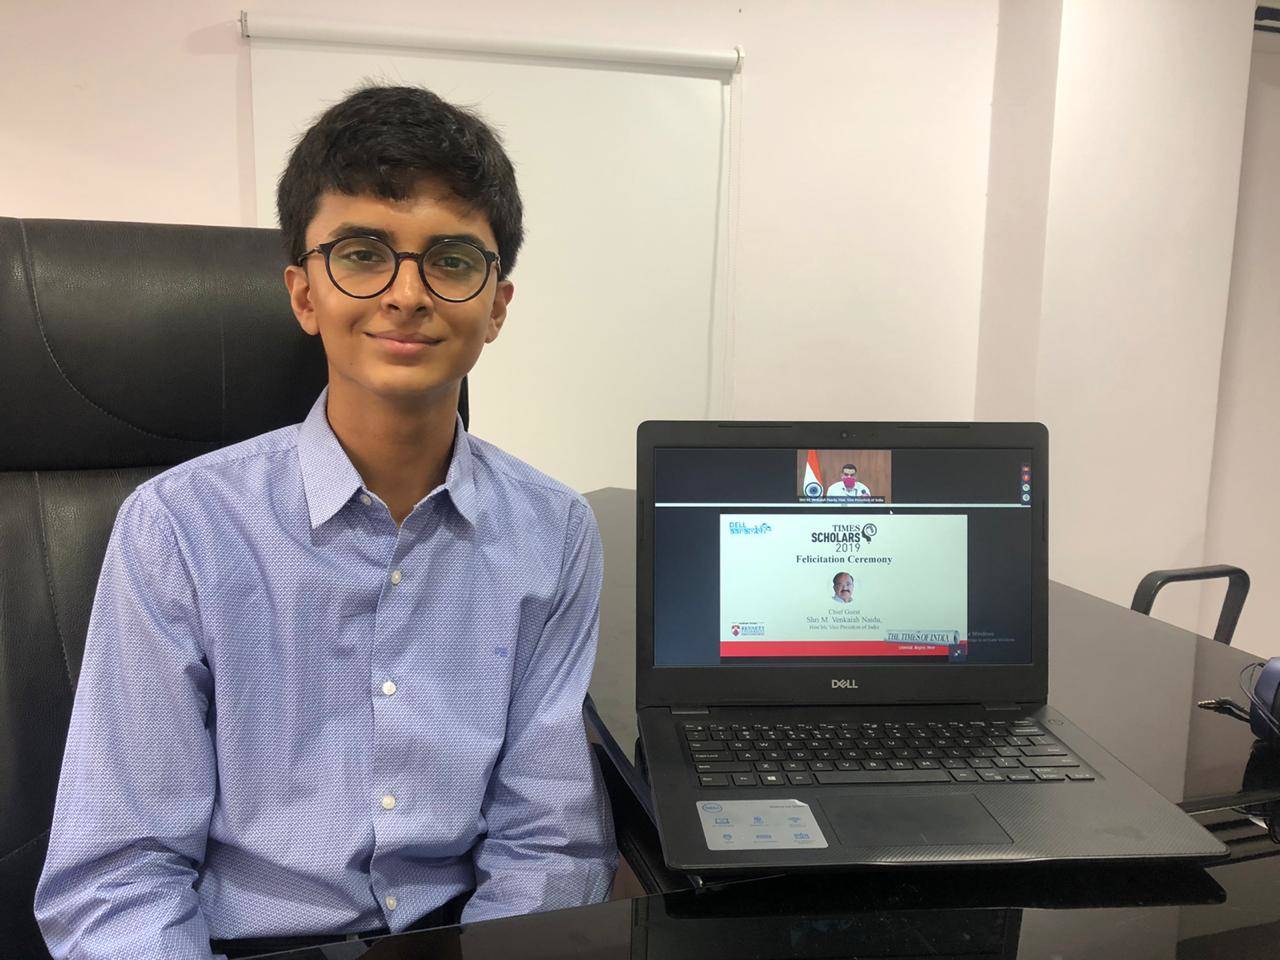 Udaipur student Vidit Baya bags the Times Scholar 2019 award - Well read is well prepared